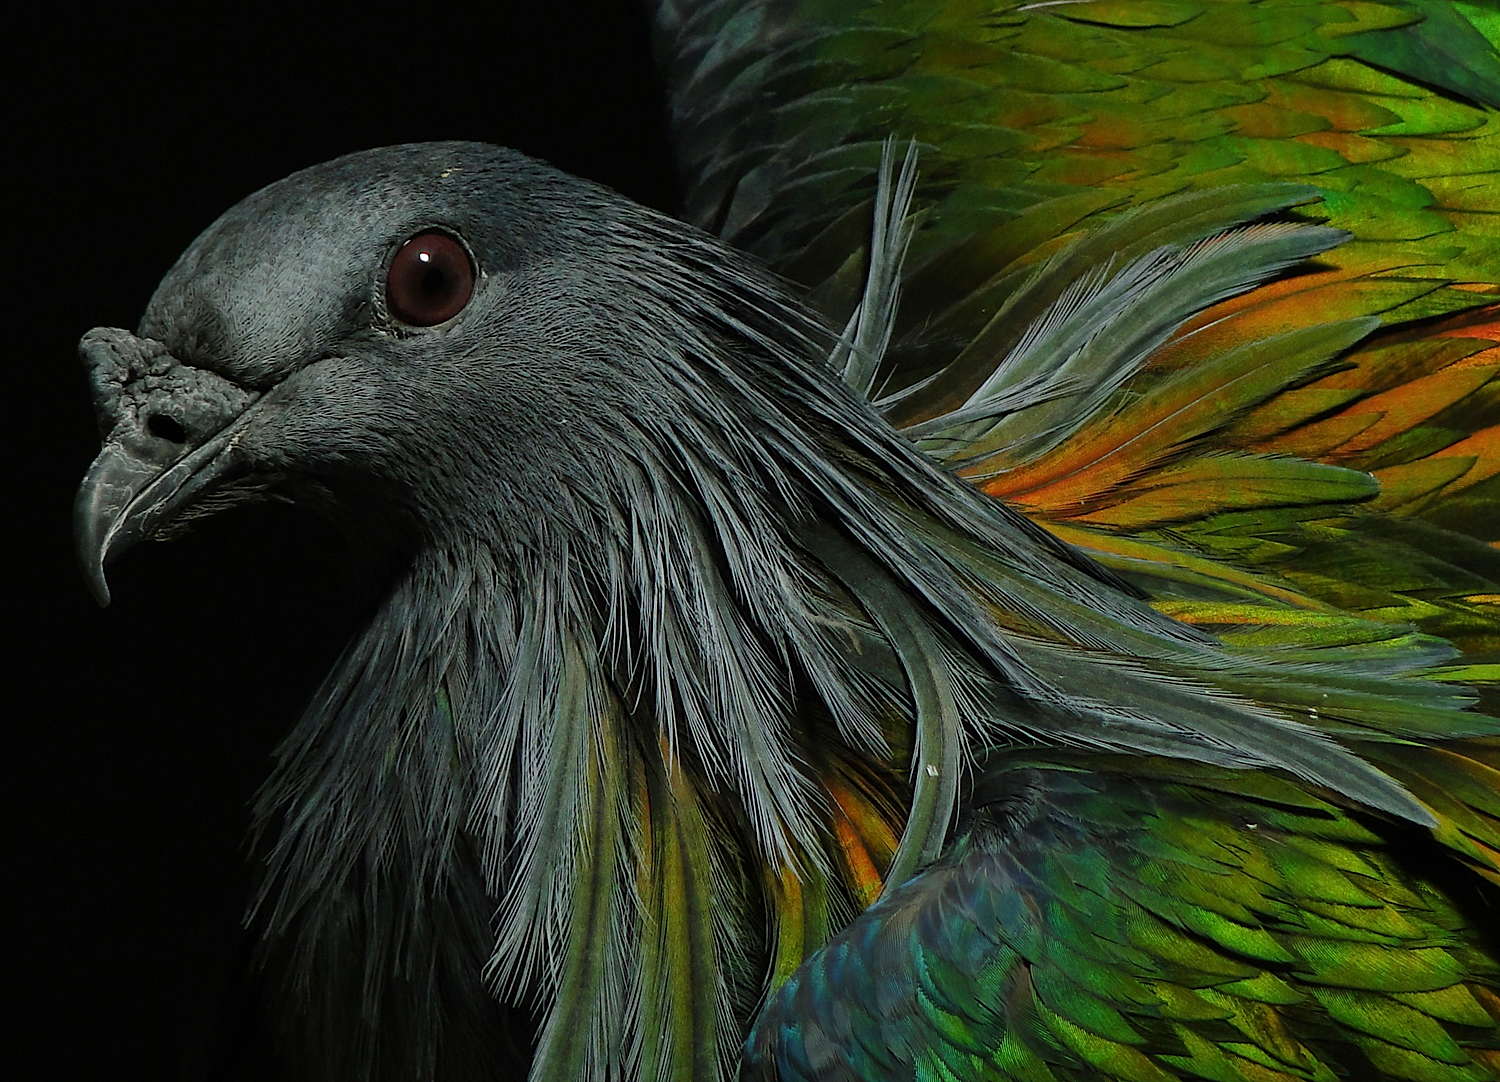 nicobar_pigeon_is_my_favorite_bird_that_resides_in_central_park_s_zoo.jpg